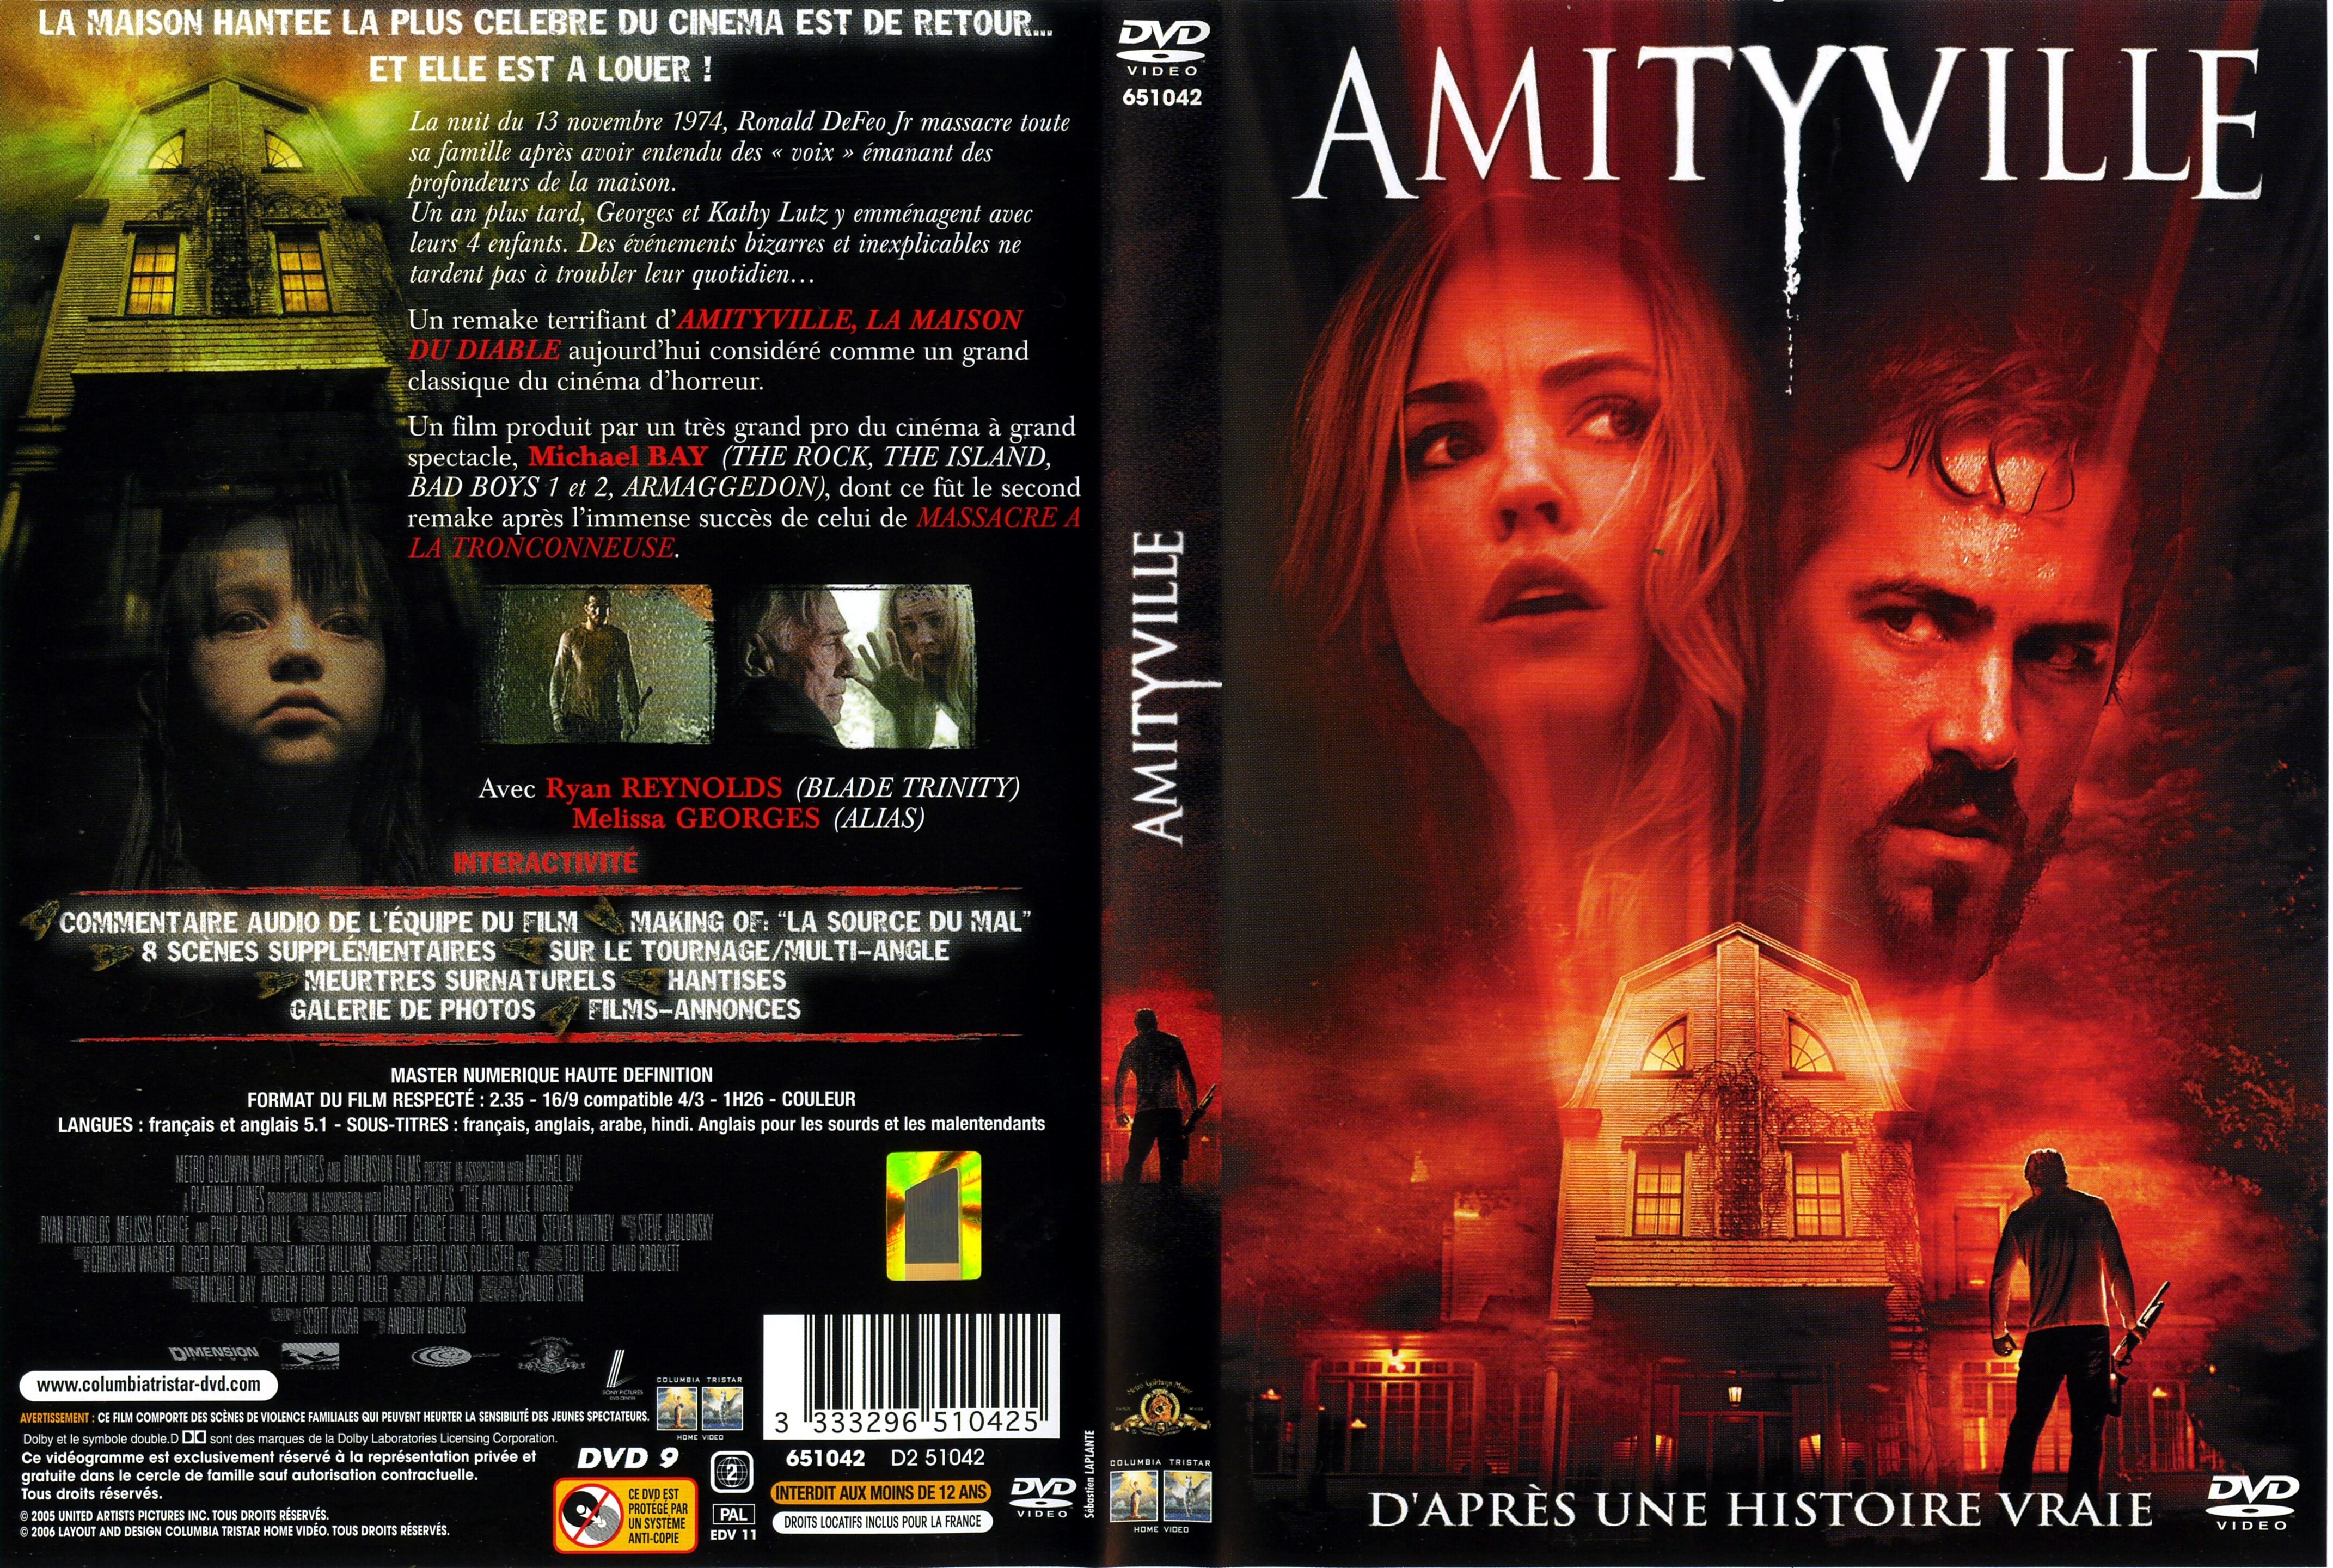 Jaquette DVD Amityville 2005